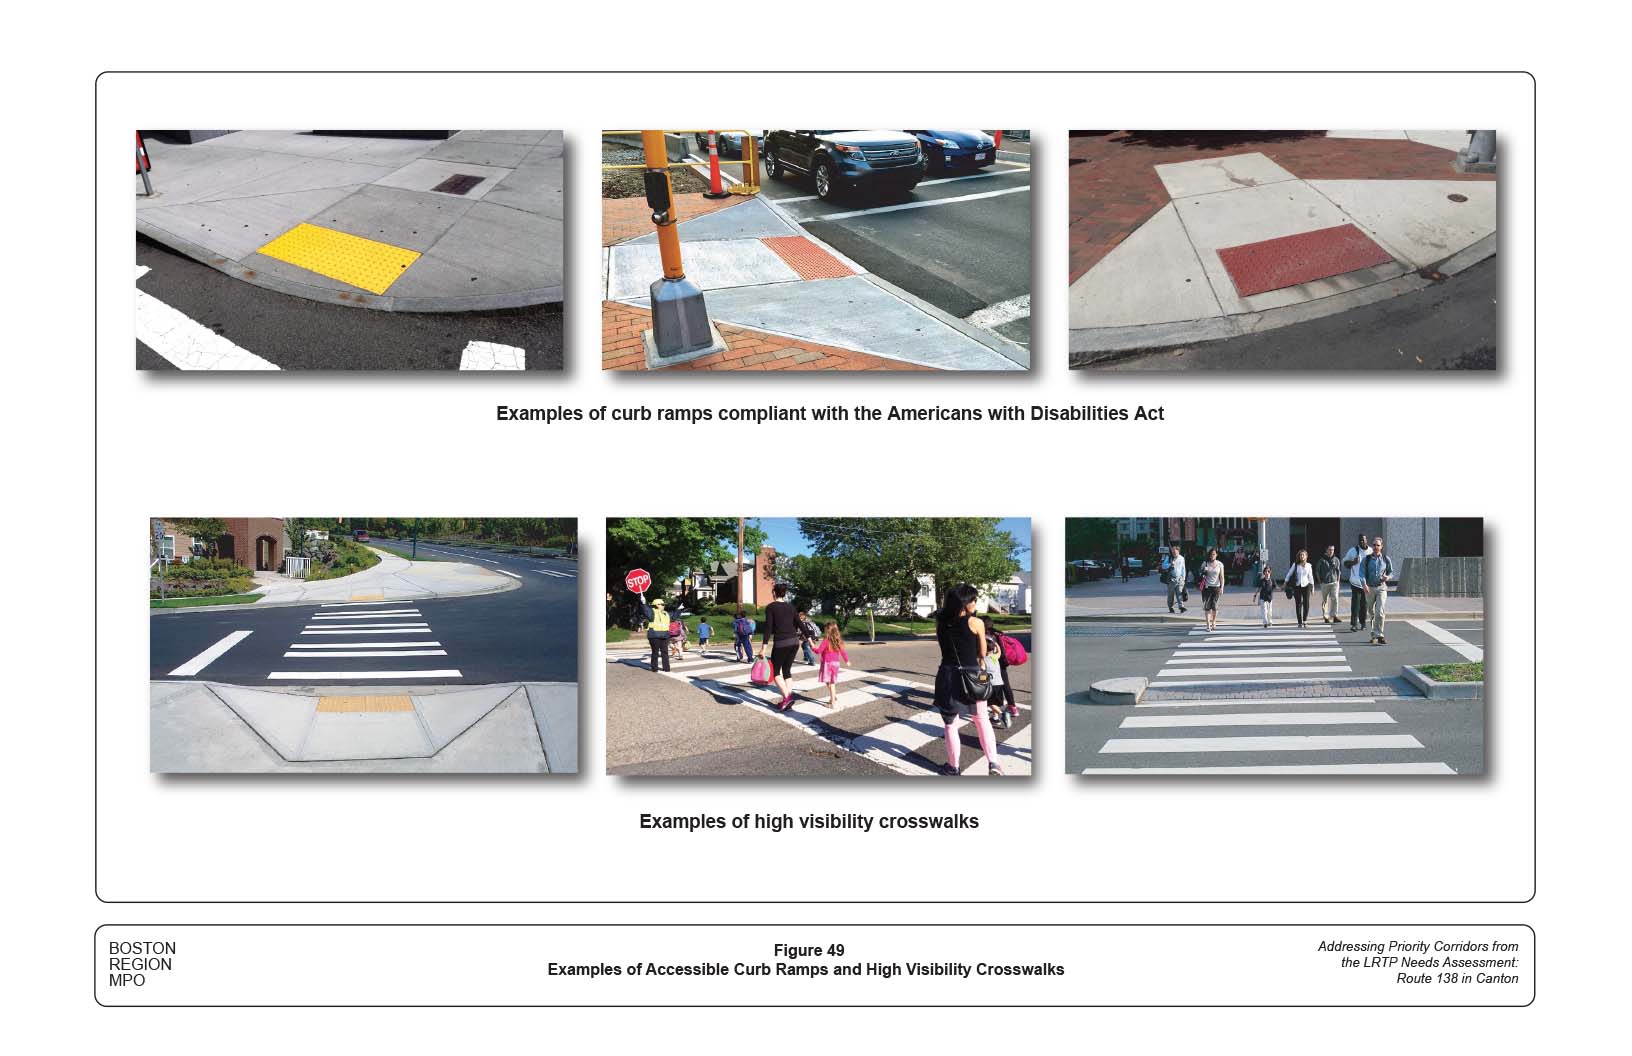 Figure 49 contains six photographs showing examples of accessible curb ramps and high visibility crosswalks.